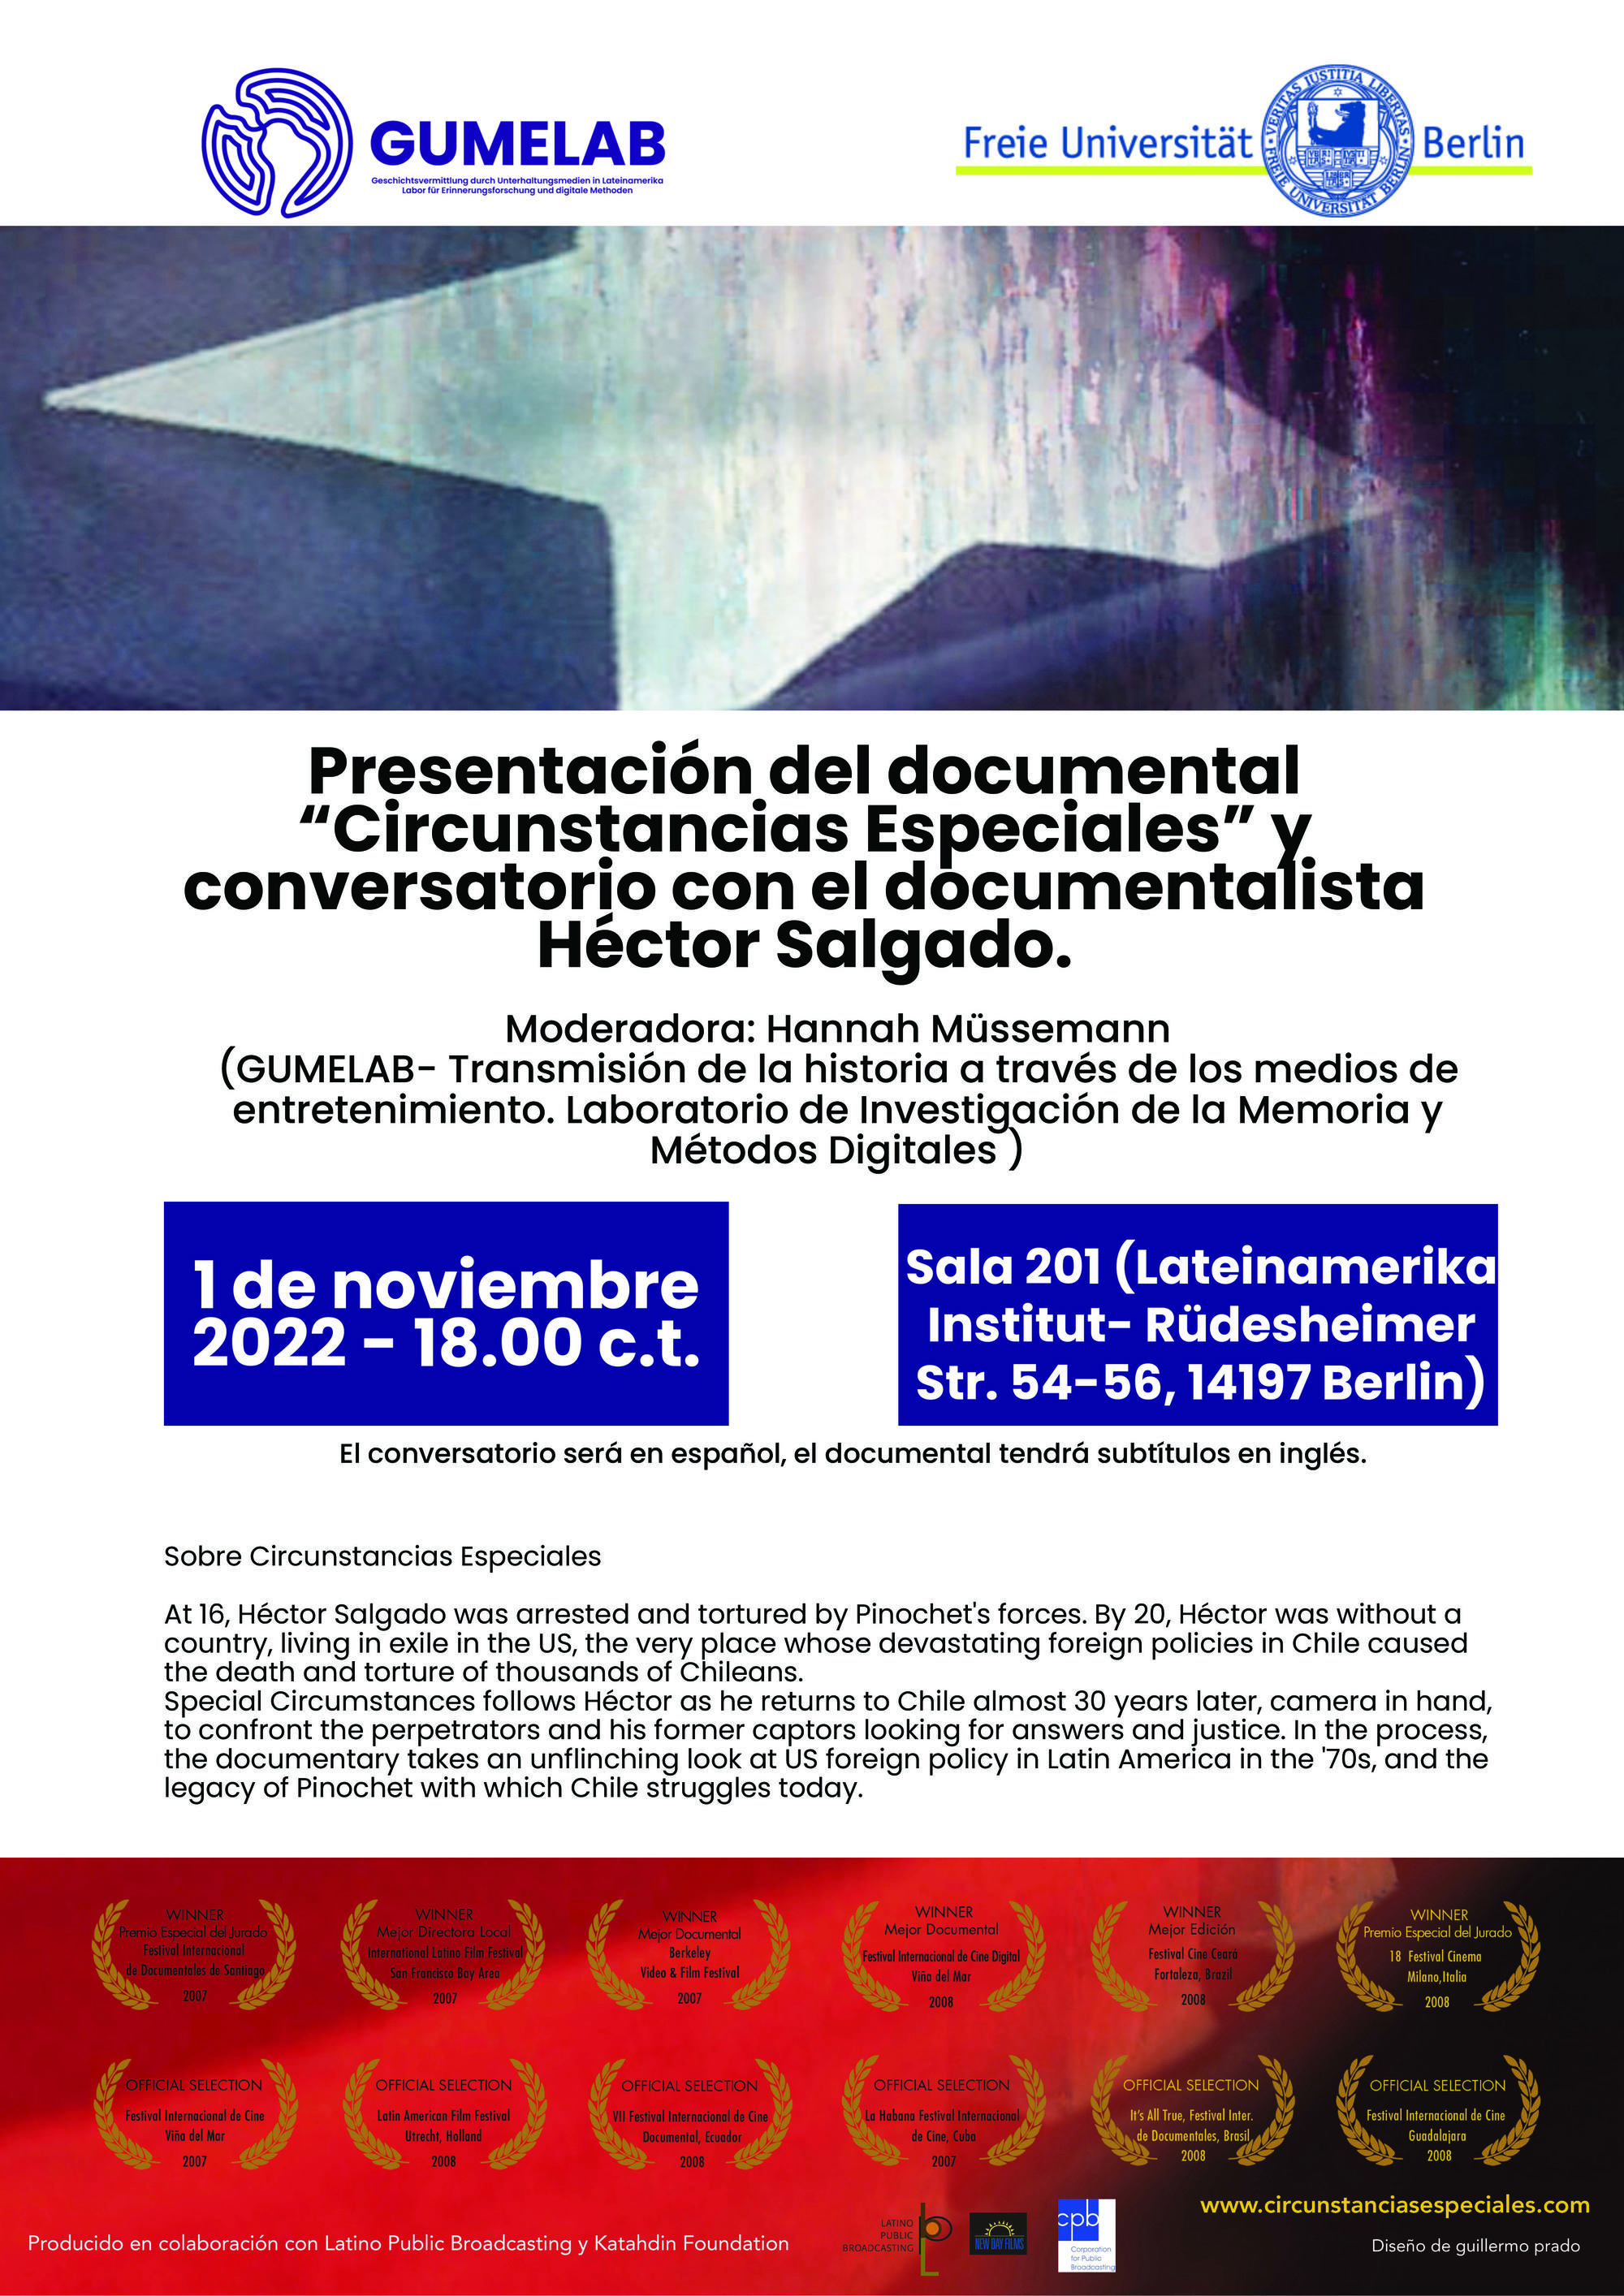 Screening of the documentary film "Special circumstances", 01.11.22